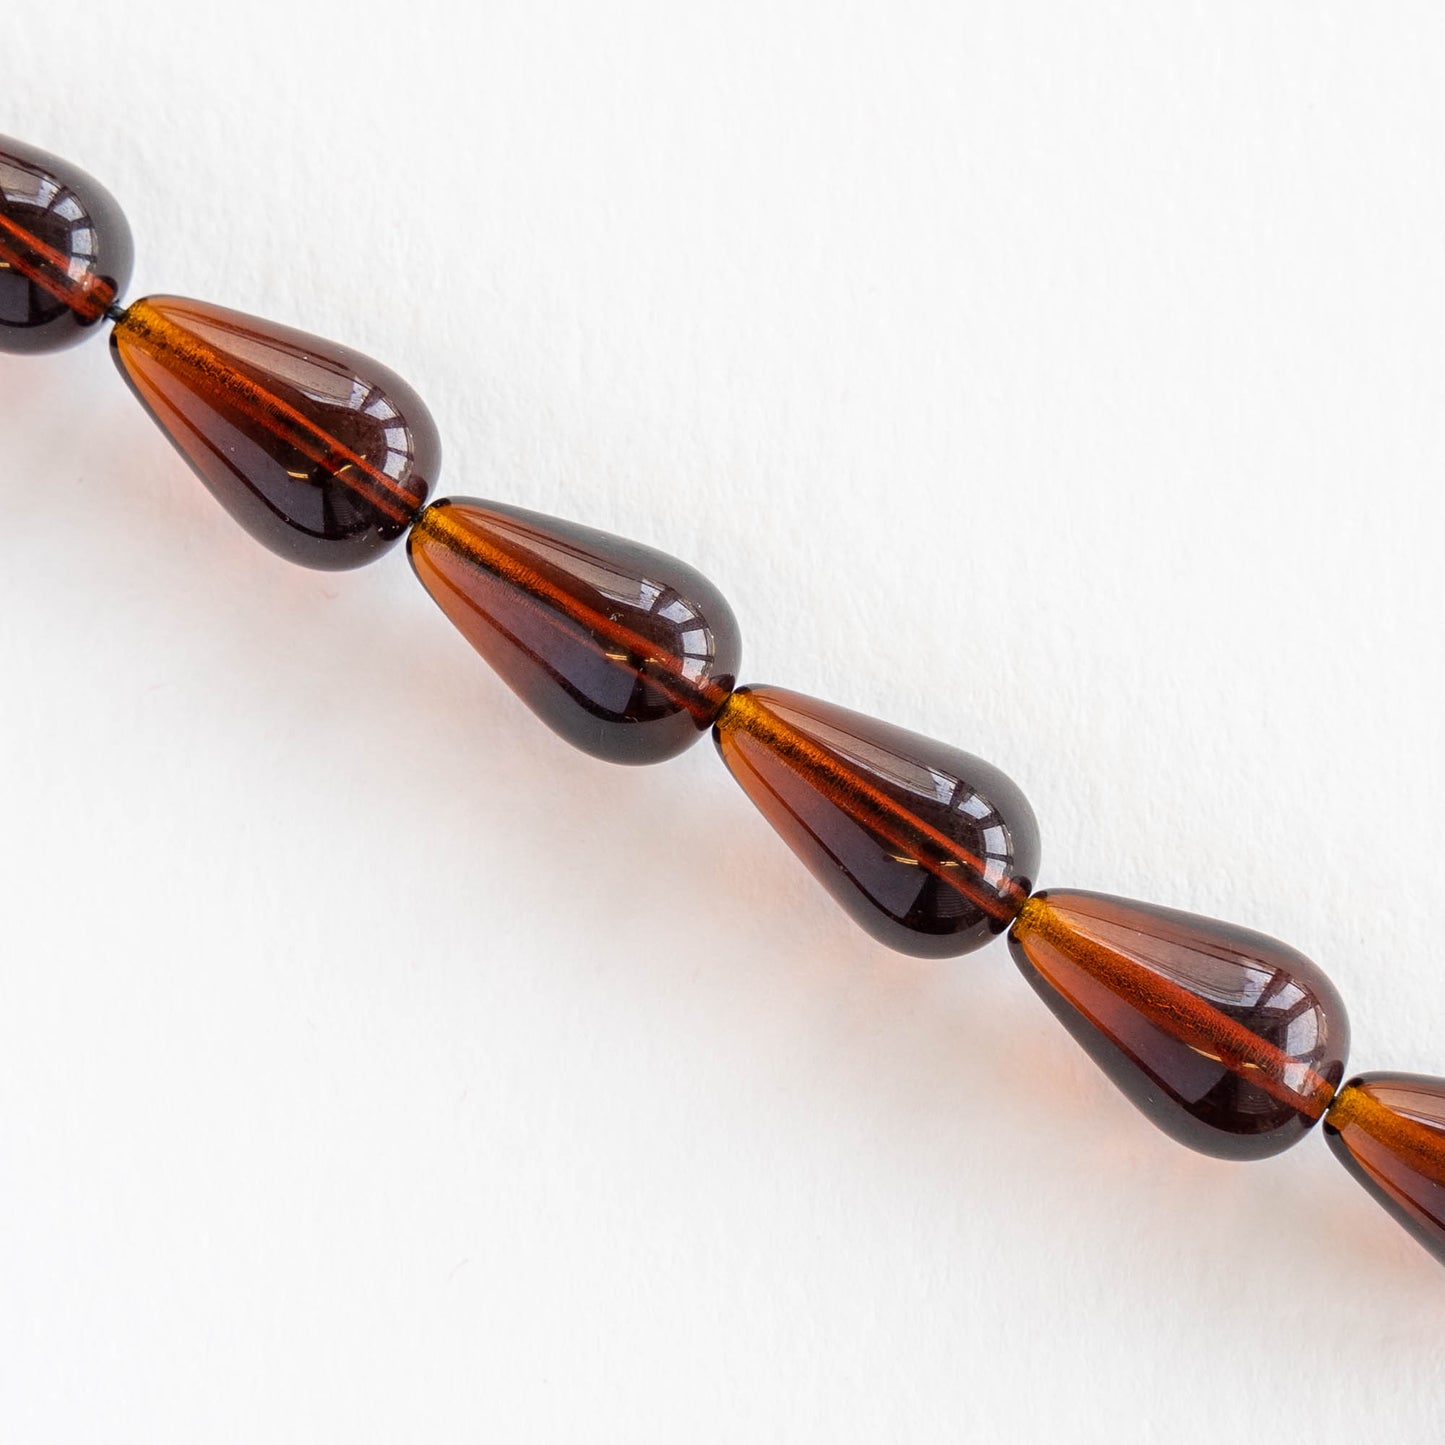 11x18mm Long Drilled Drops - Dk Amber - 30 Beads